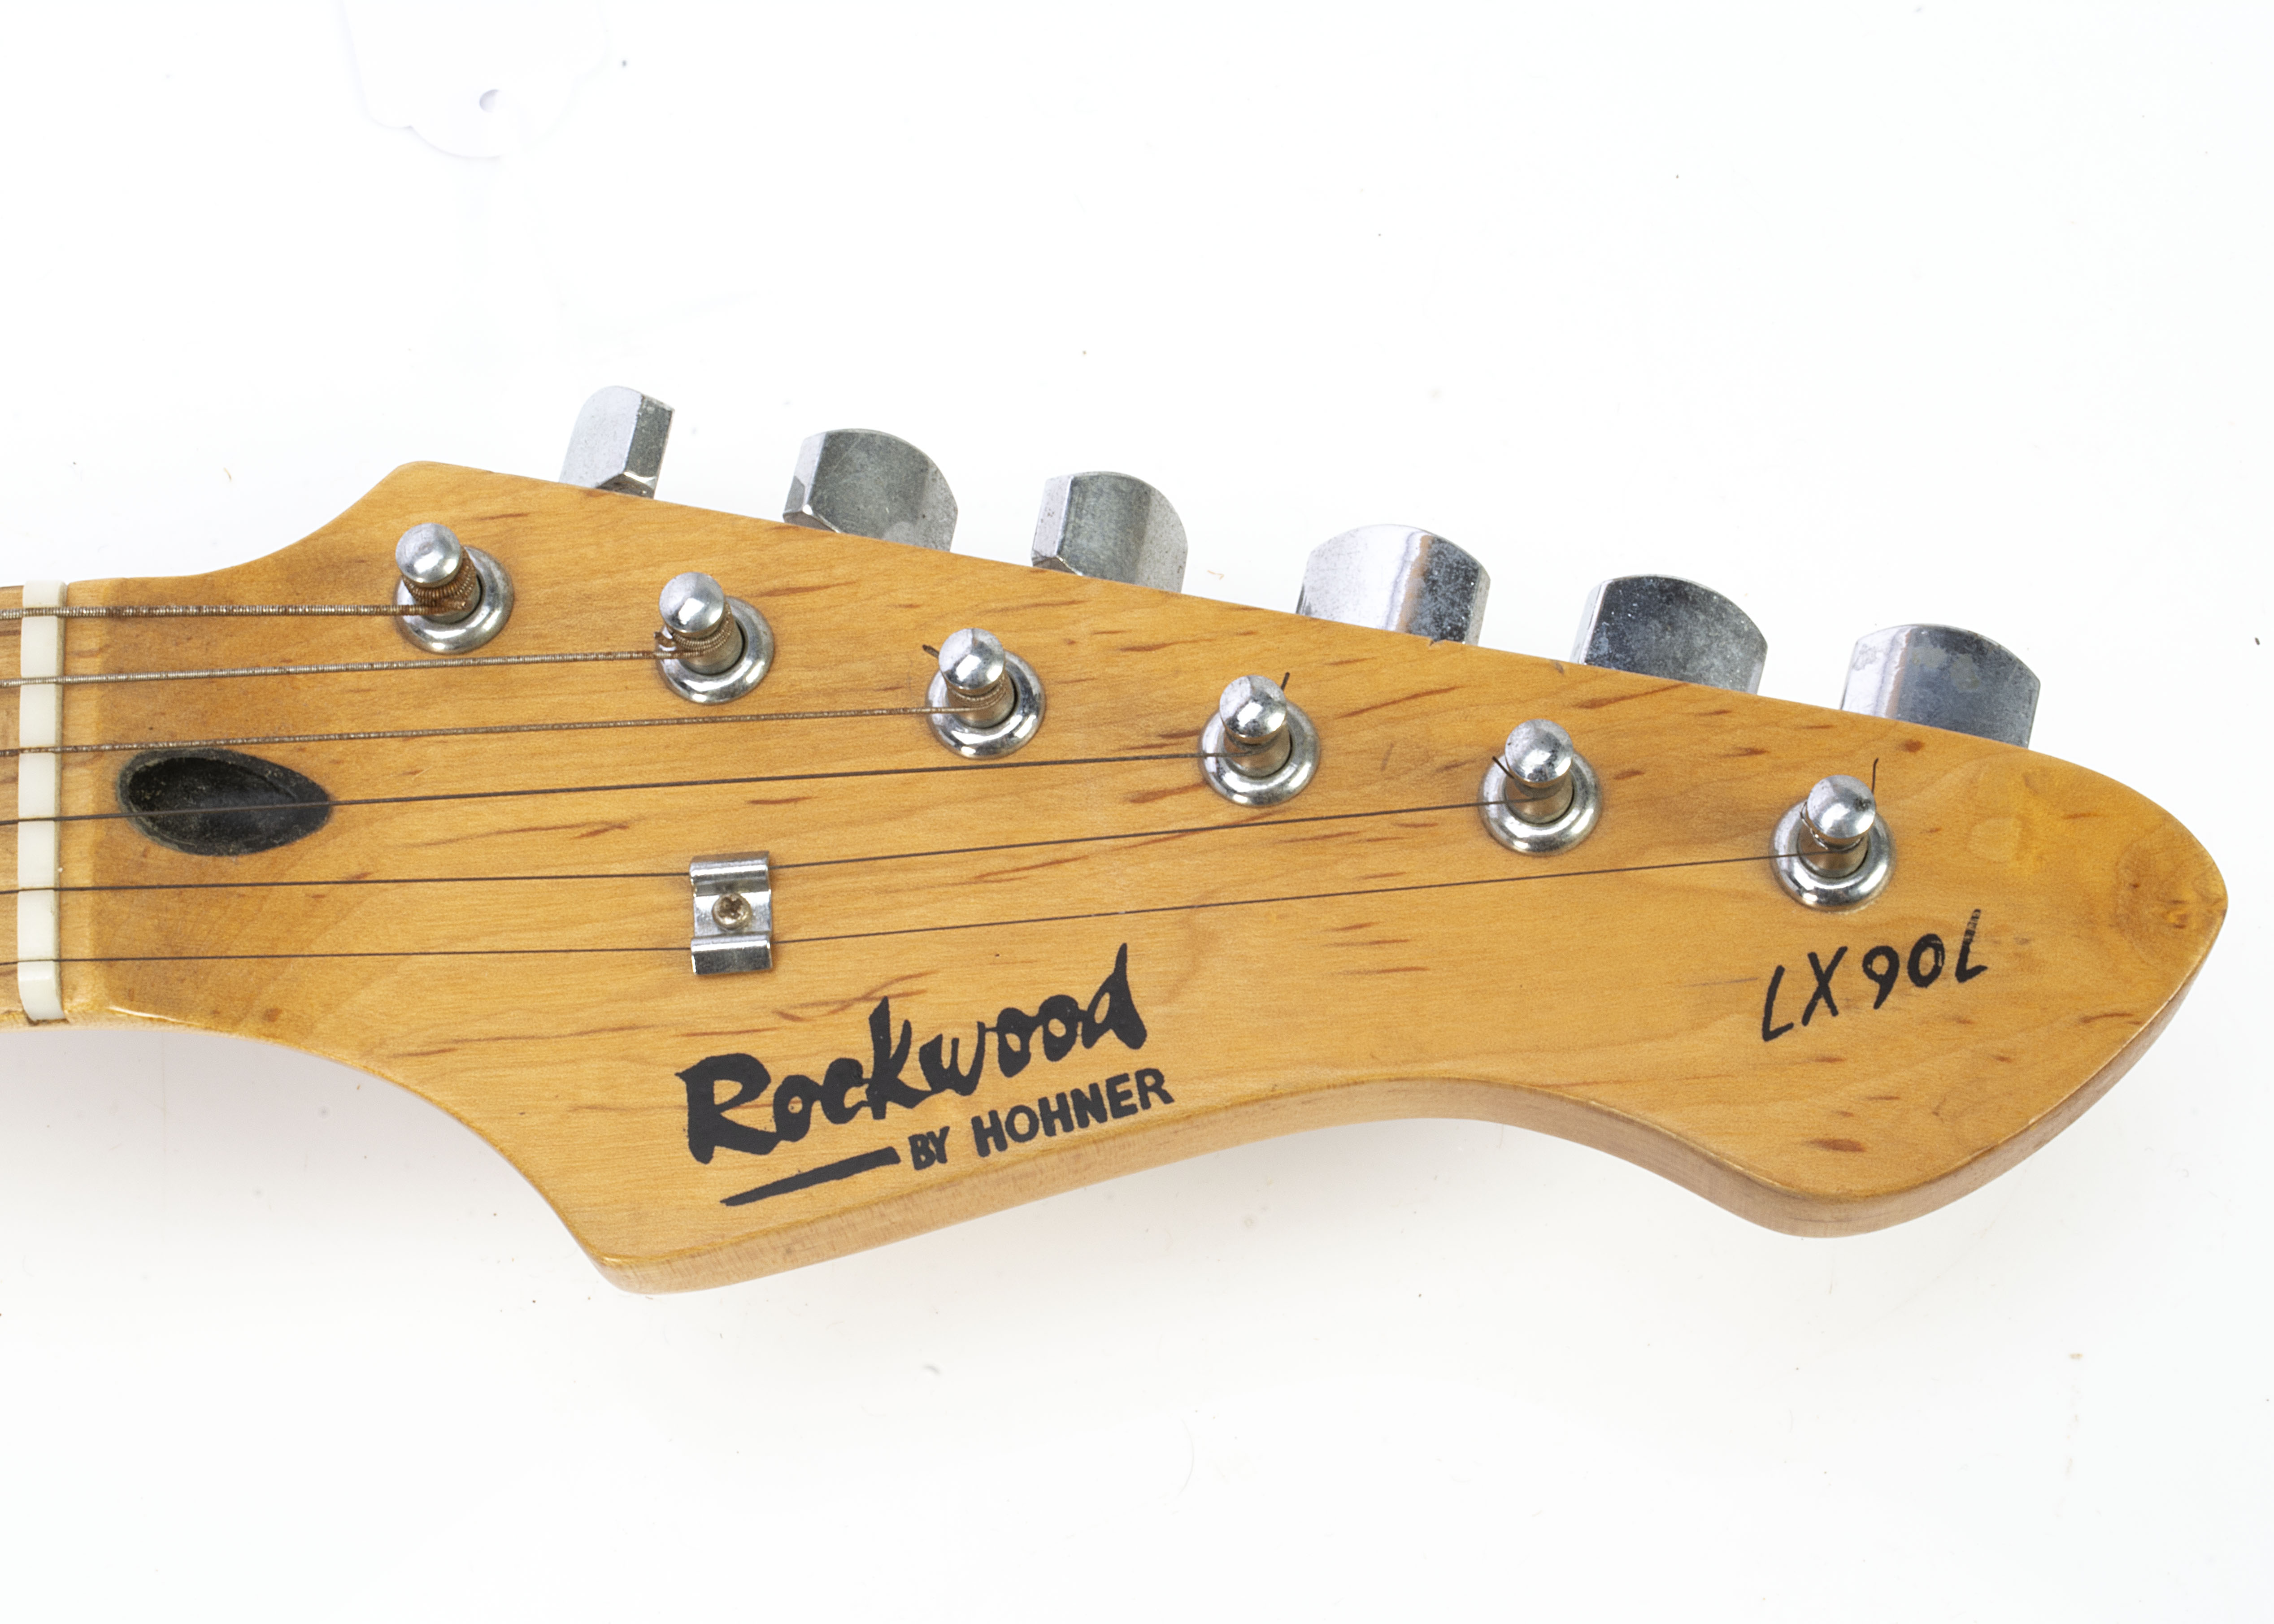 Electric Guitars, two guitars comprising a Rockwood by Hohner model LX 90L with tremolo arm together - Image 2 of 8